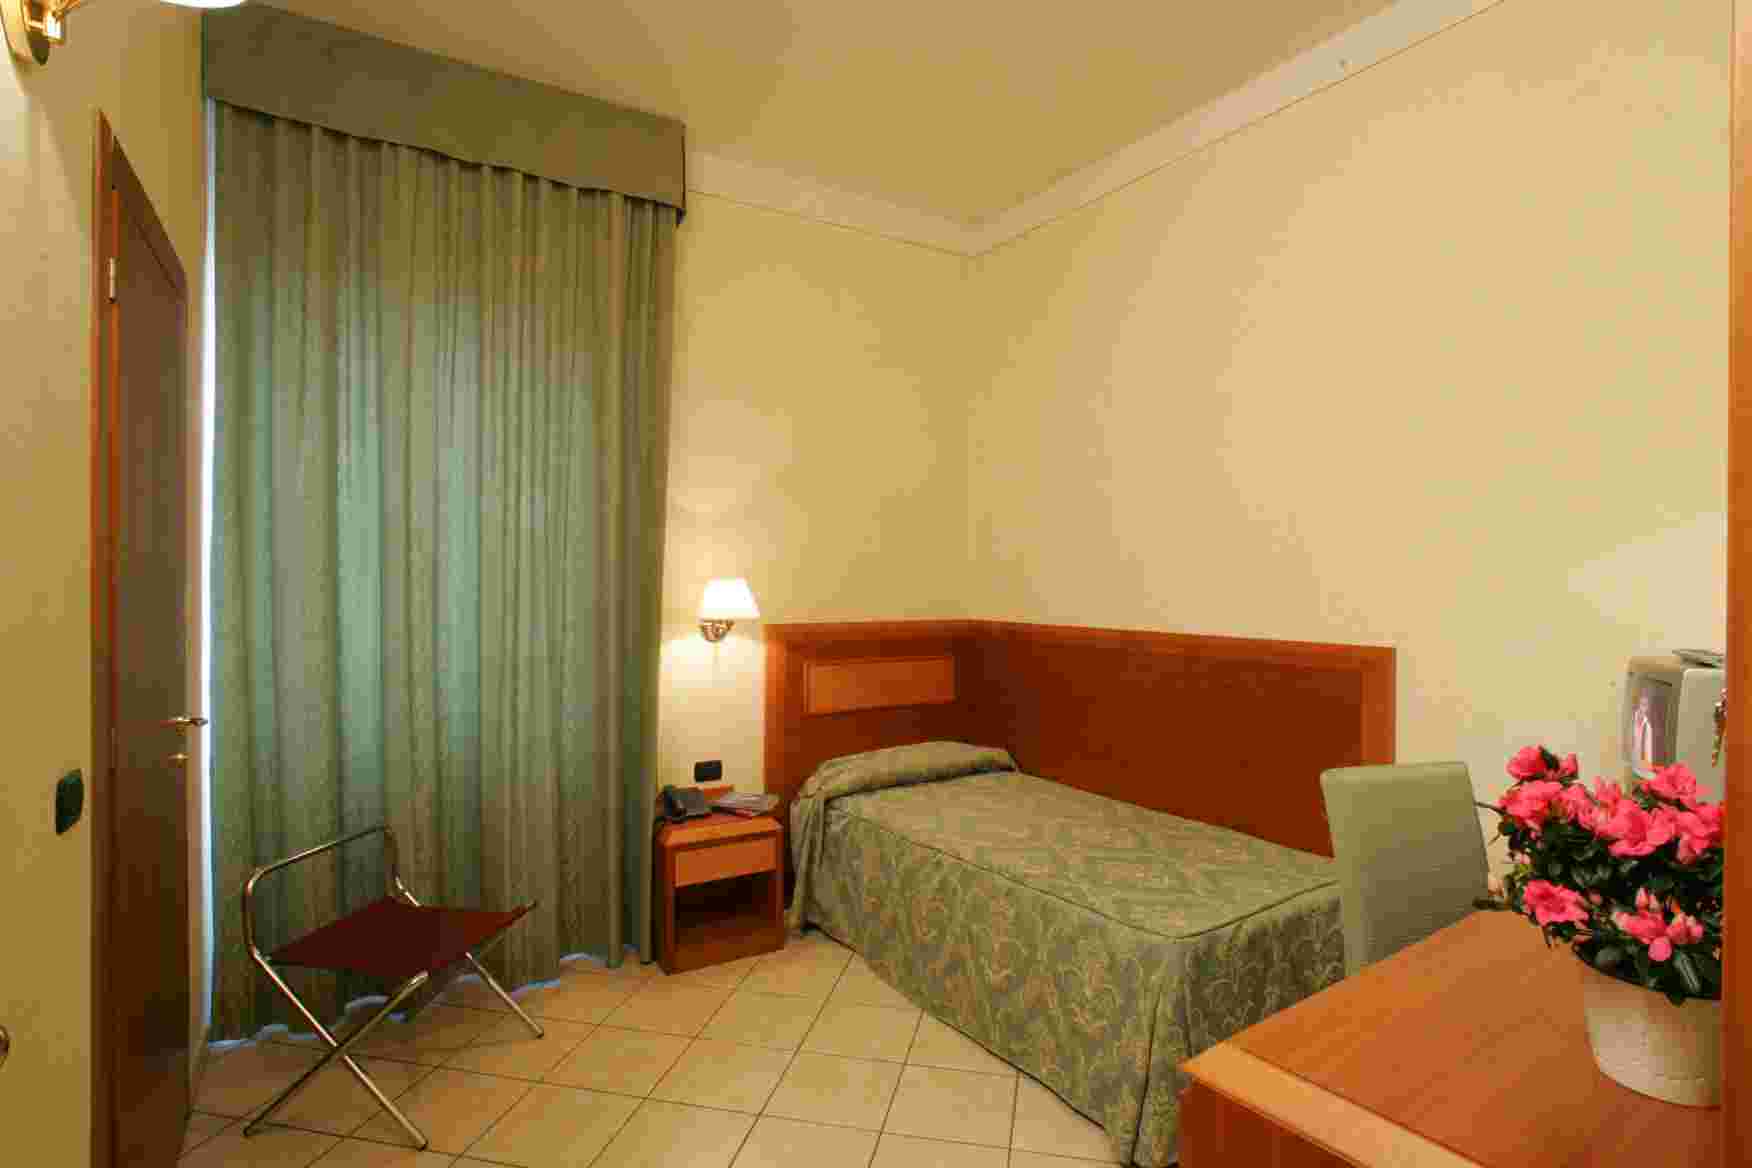 Hotel Mia Cara, Florence, Italy, rural hotels and hostels in Florence